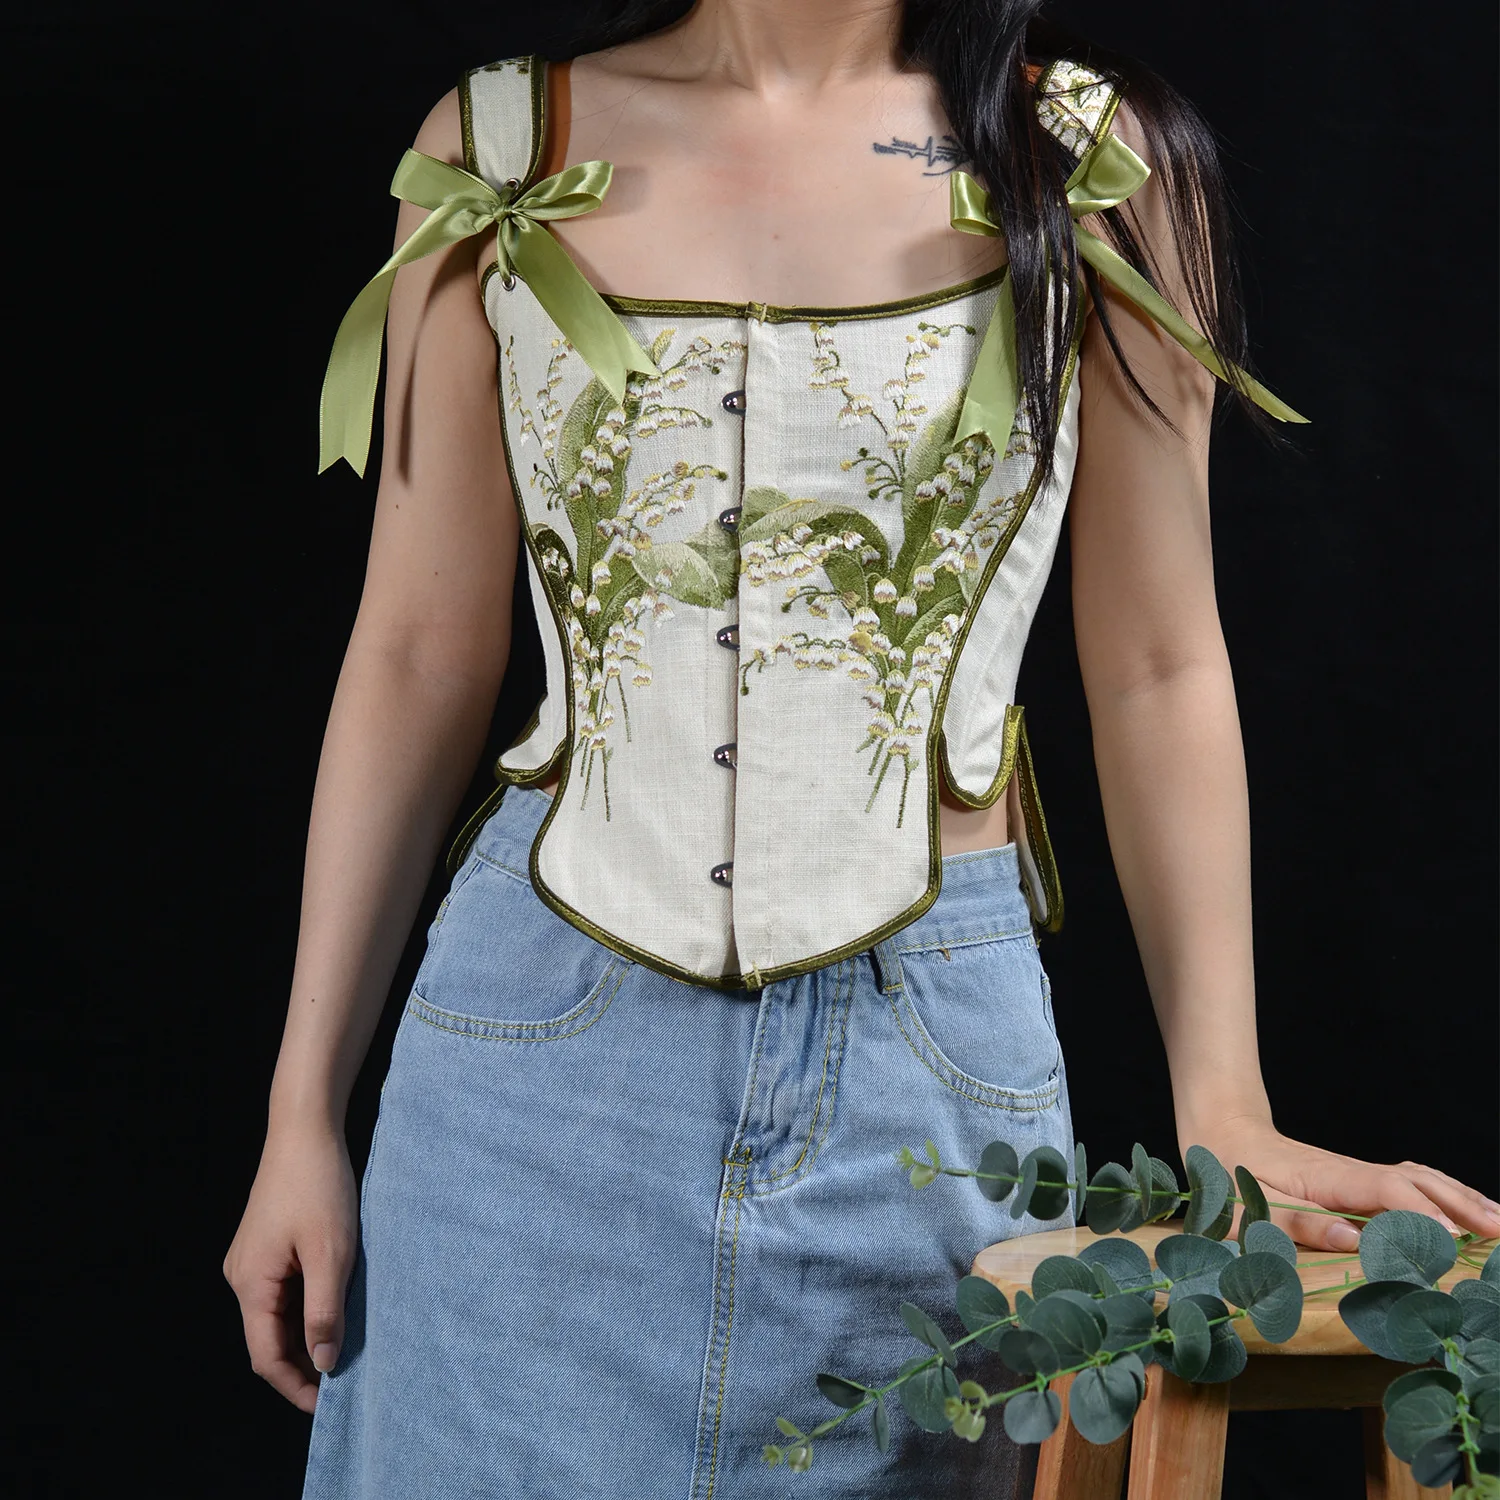 Women Corset Crop Over Bust With Straps Lace Up Vintage Lily Of The Valley Embroidery Bustiers Costume Slimming Sleeveless Tops